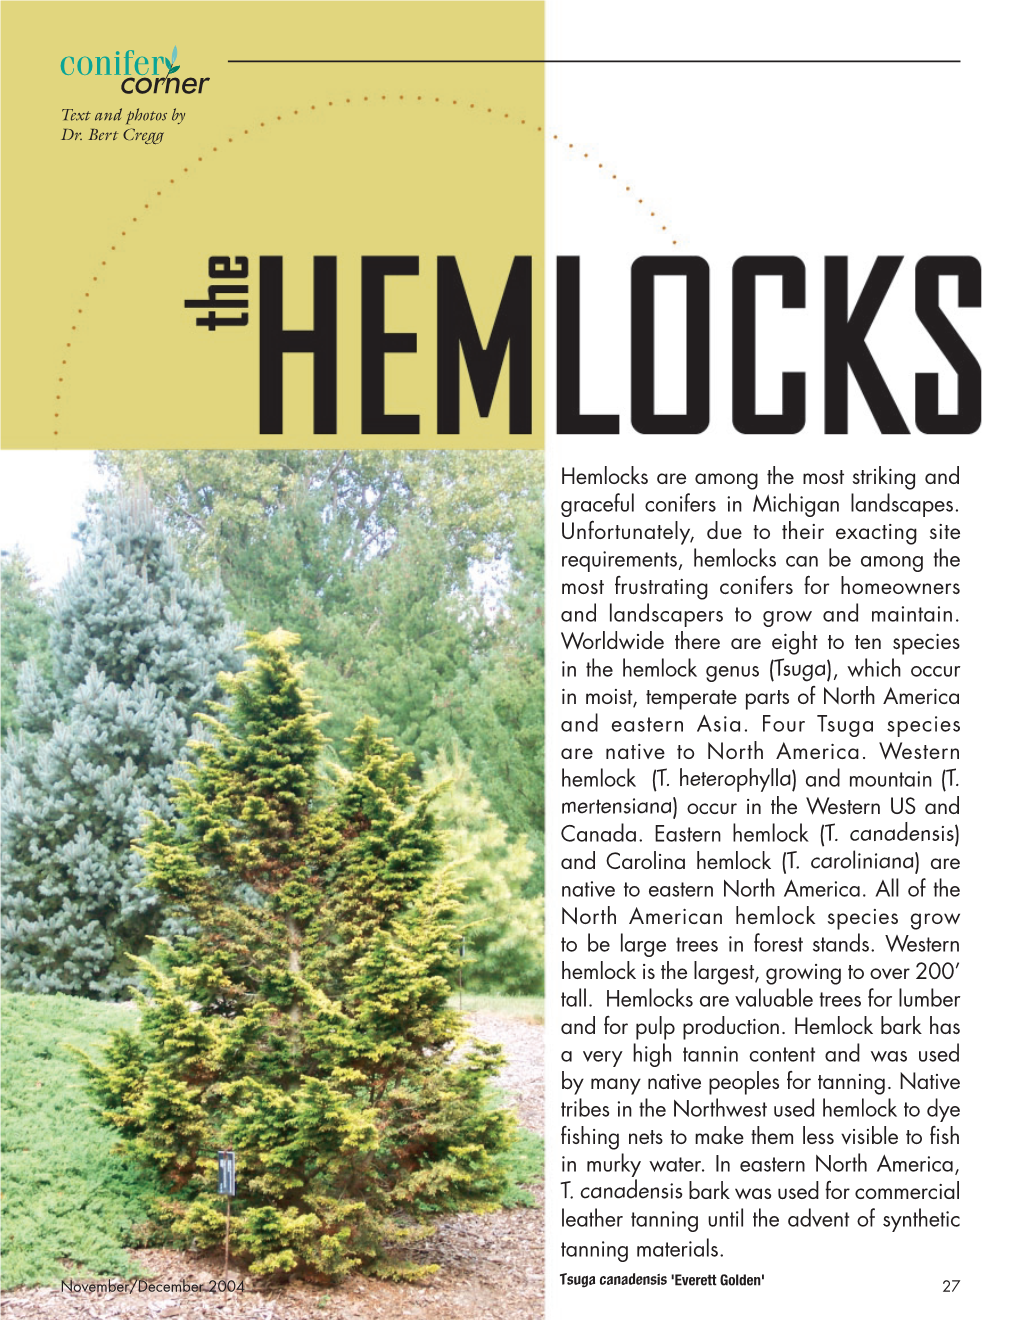 Hemlocks Are Among the Most Striking and Graceful Conifers in Michigan Landscapes